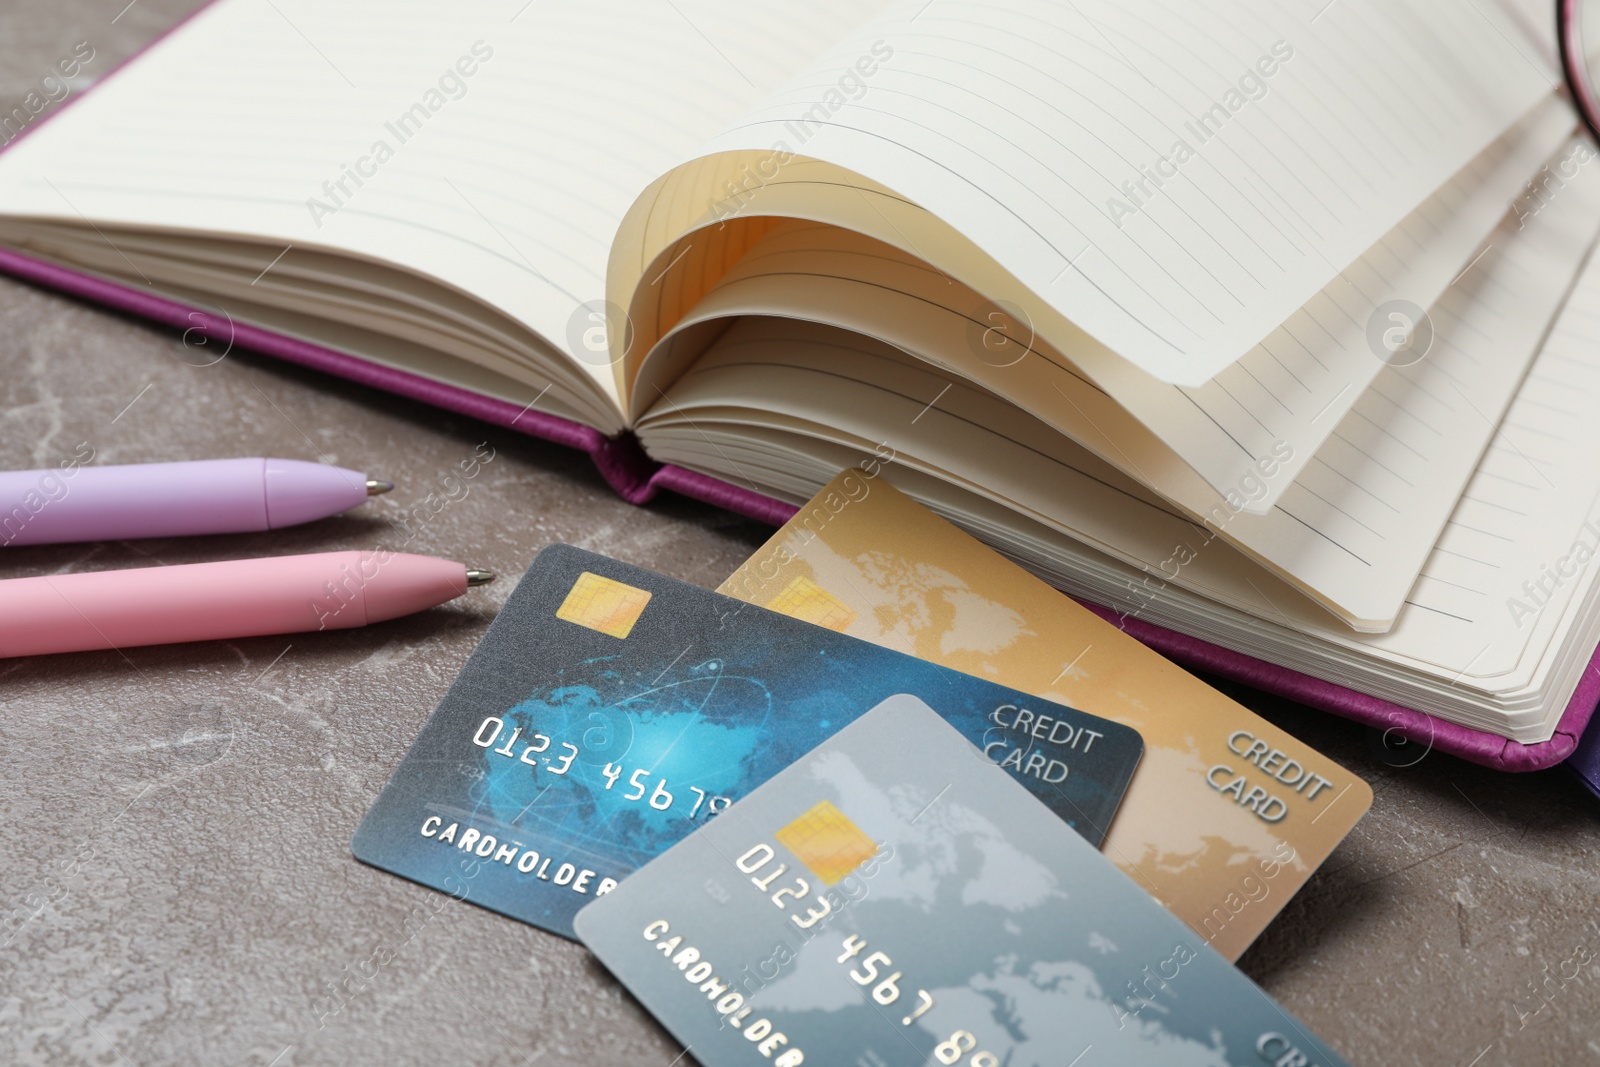 Photo of Credit cards and stationery on marble table